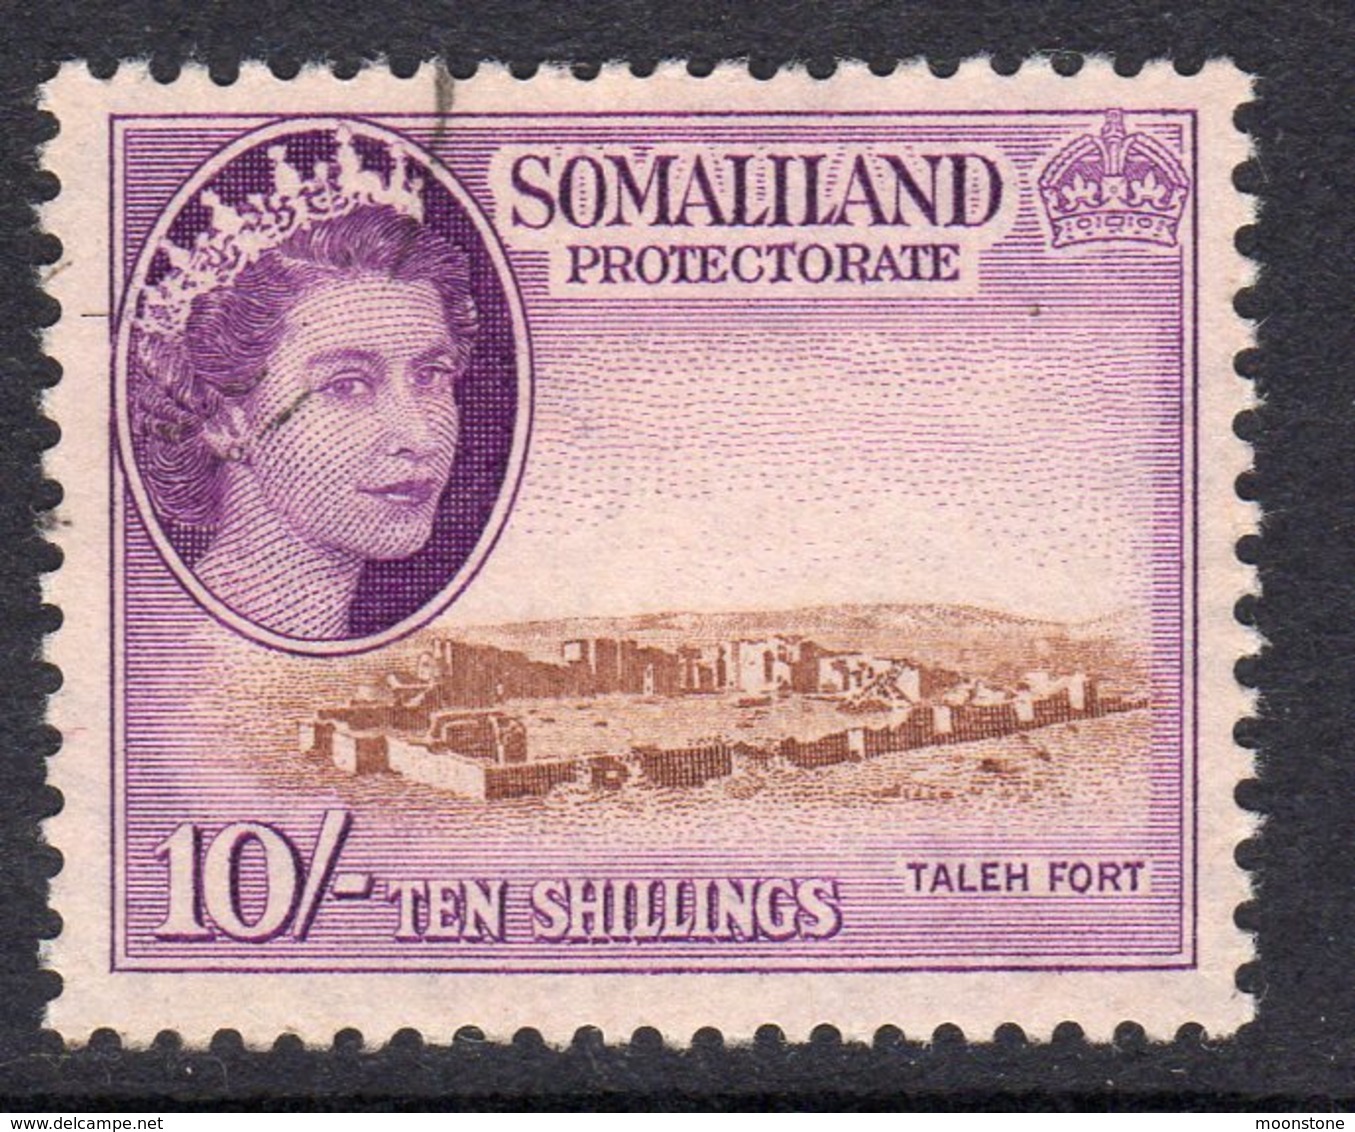 Somaliland Protectorate 1953-8 10/- Taleh Fort Definitive, Used, SG 148 (BA) - Somaliland (Protectorate ...-1959)